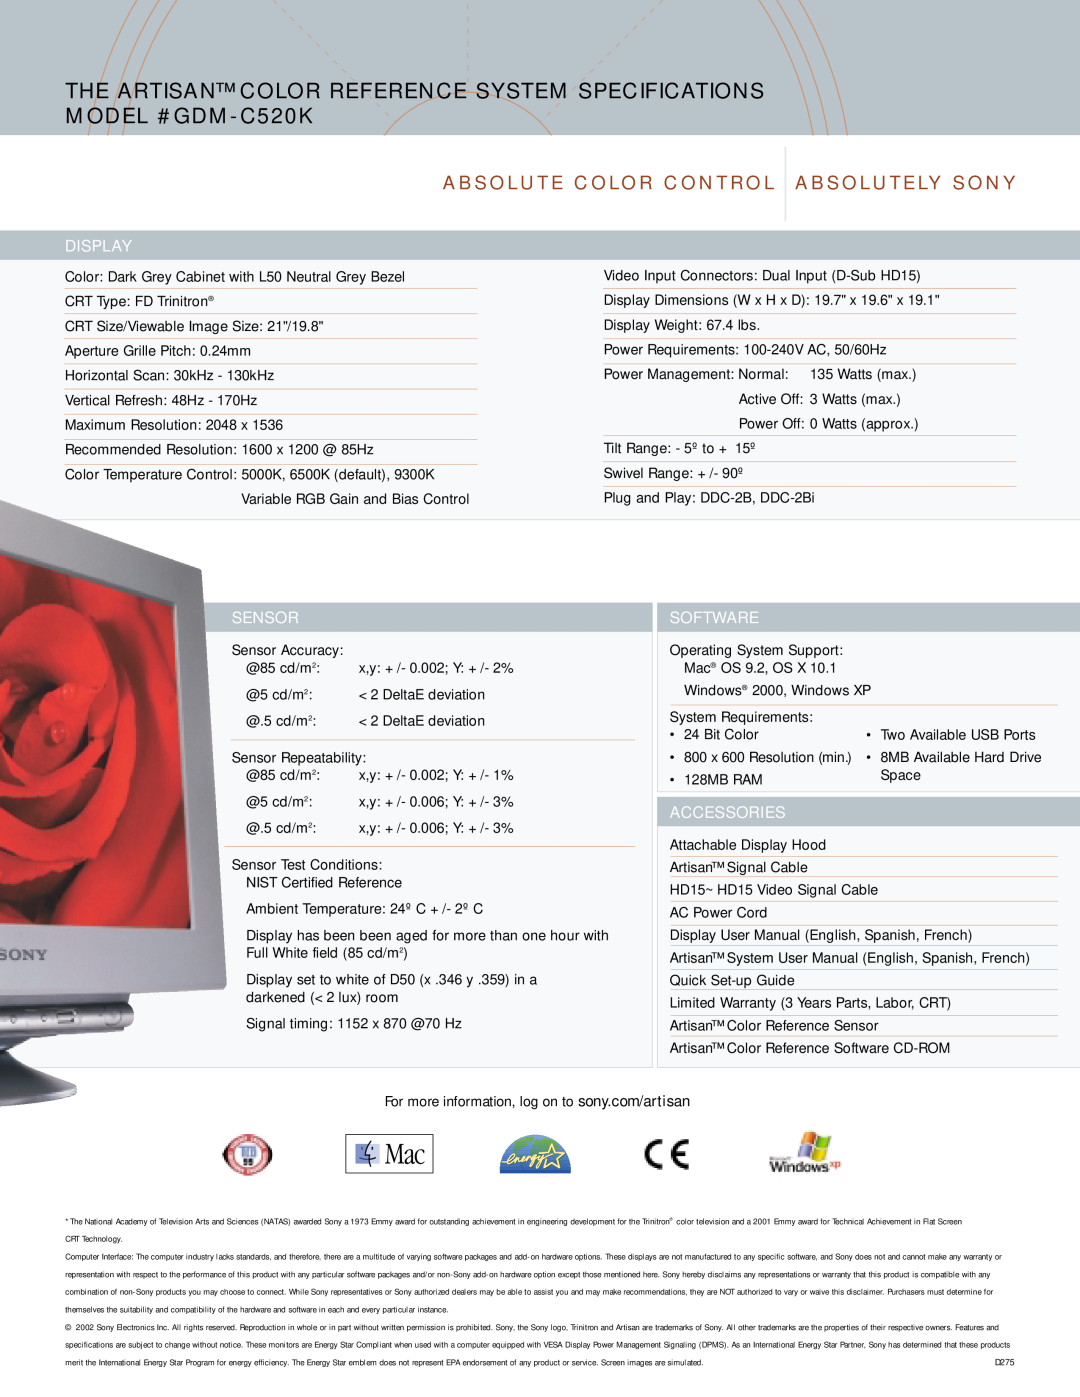 Sony manual Absolute Color Control, Absolutely Sony, THE ARTISAN COLOR REFERENCE SYSTEM SPECIFICATIONS MODEL #GDM-C520K 